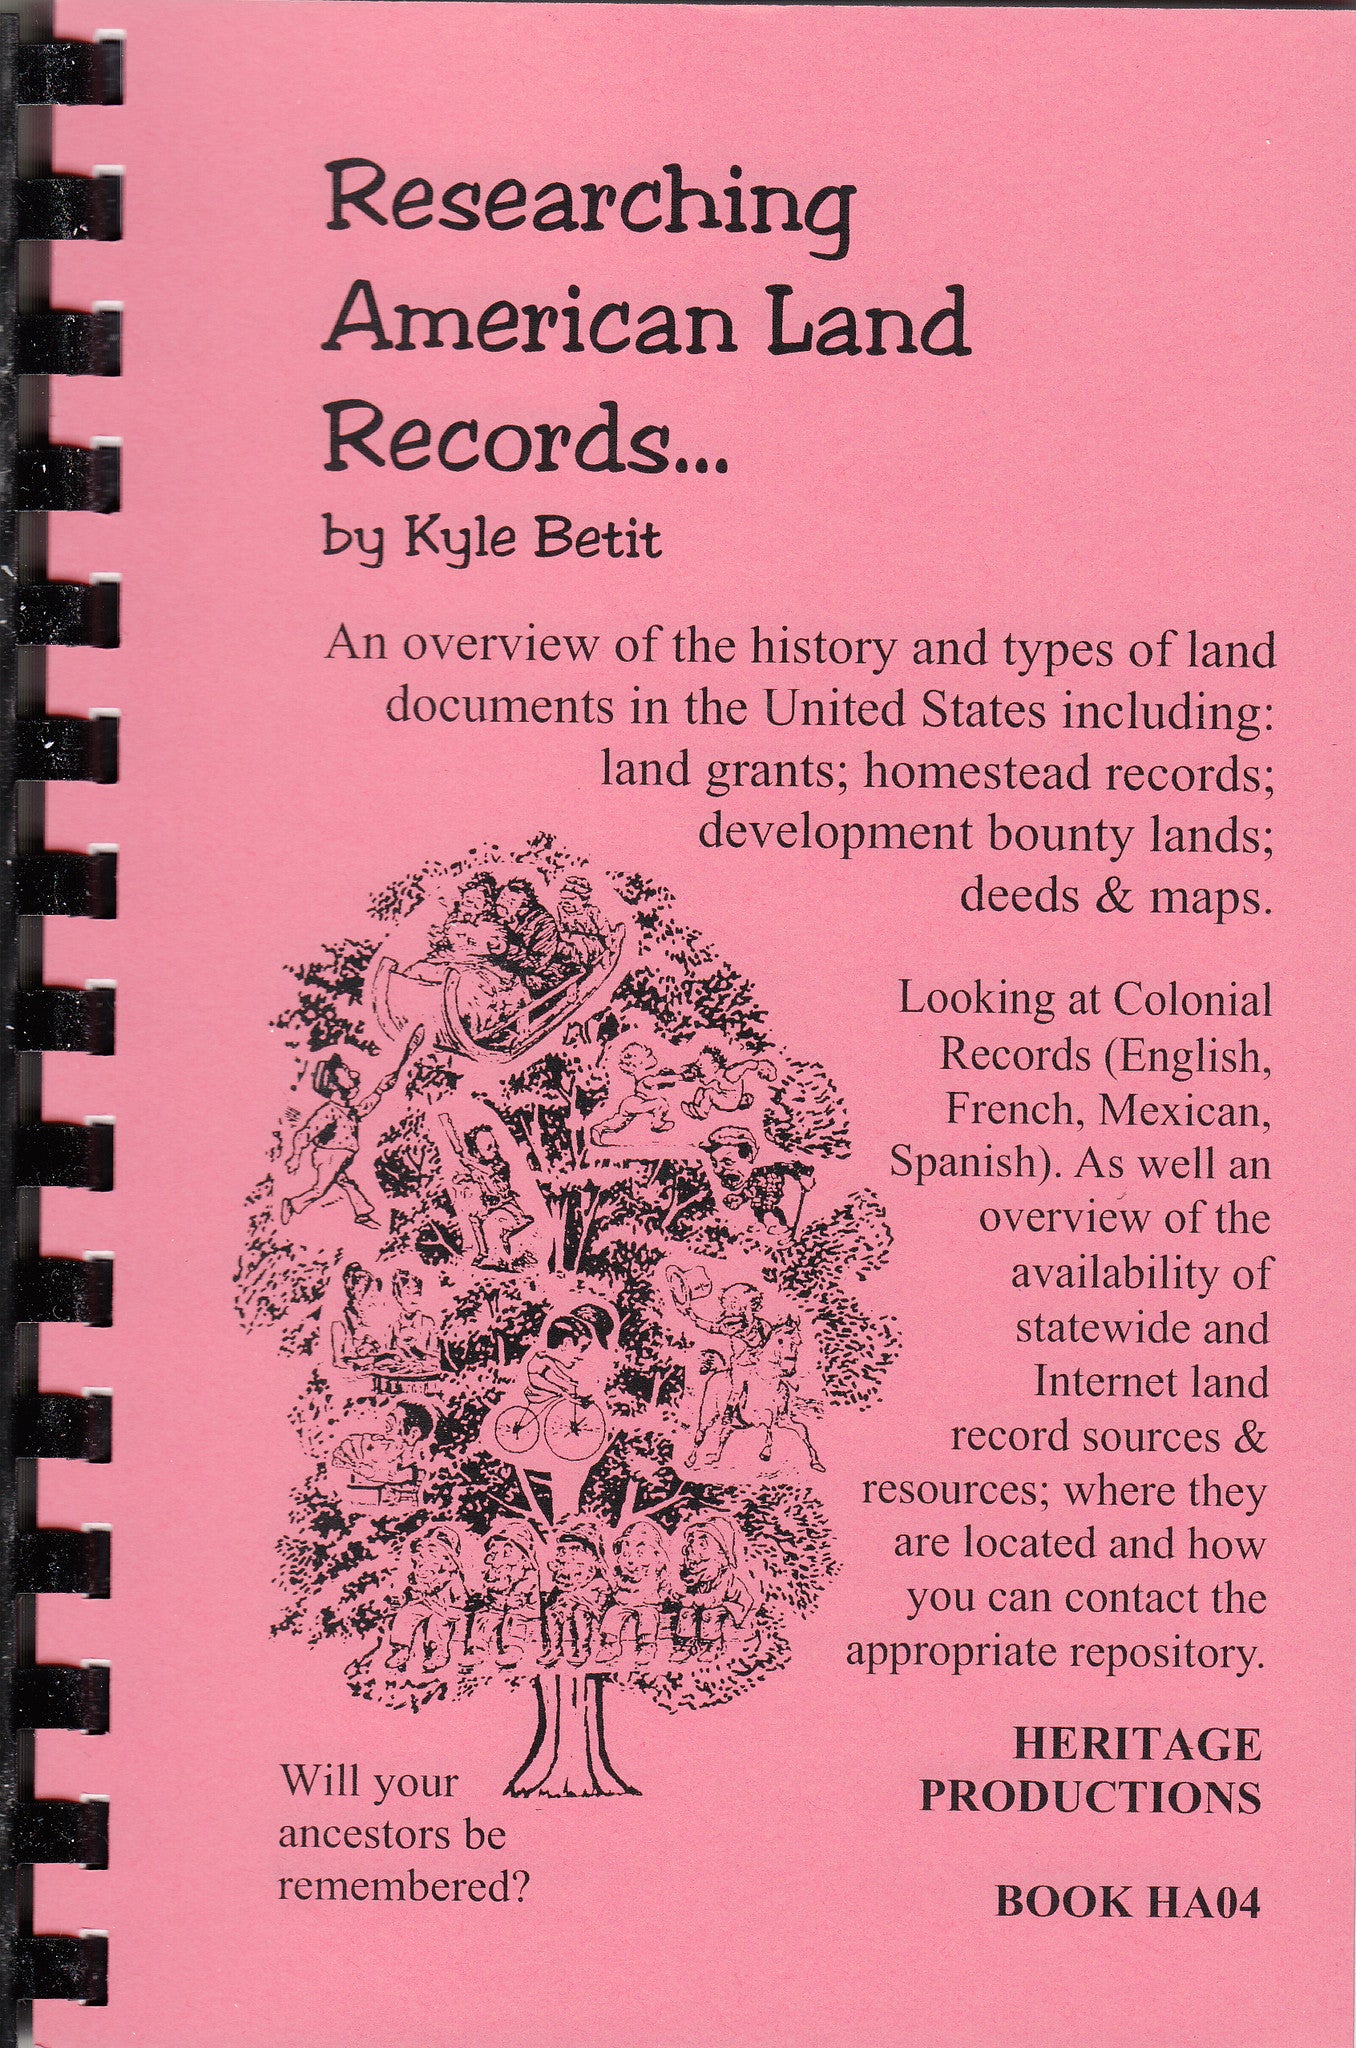 Researching American Land Records